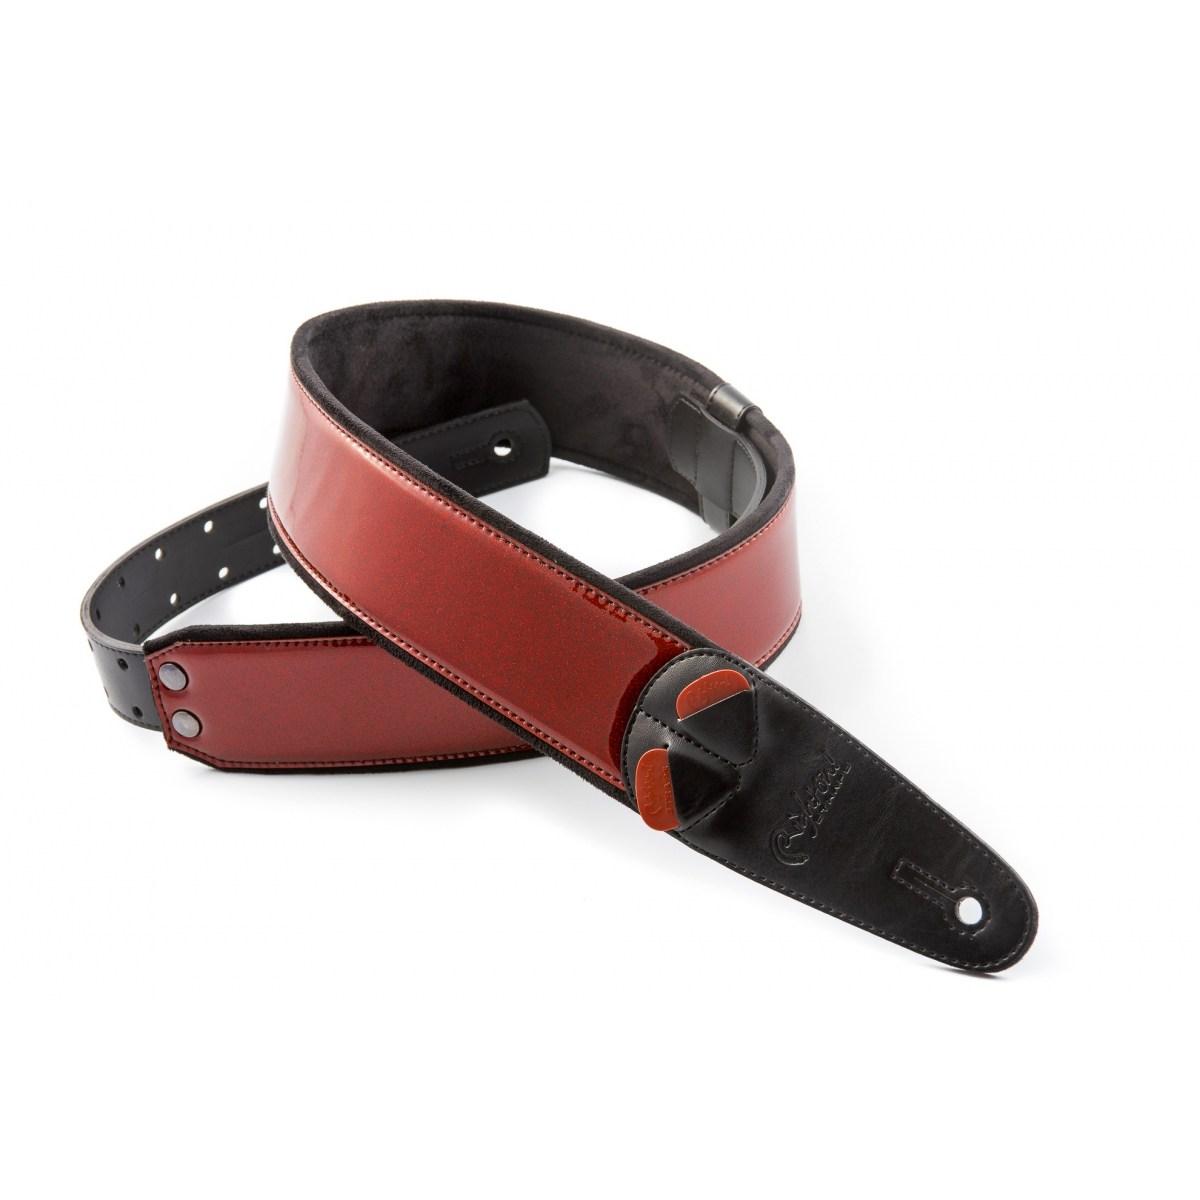 Right on straps stardust red